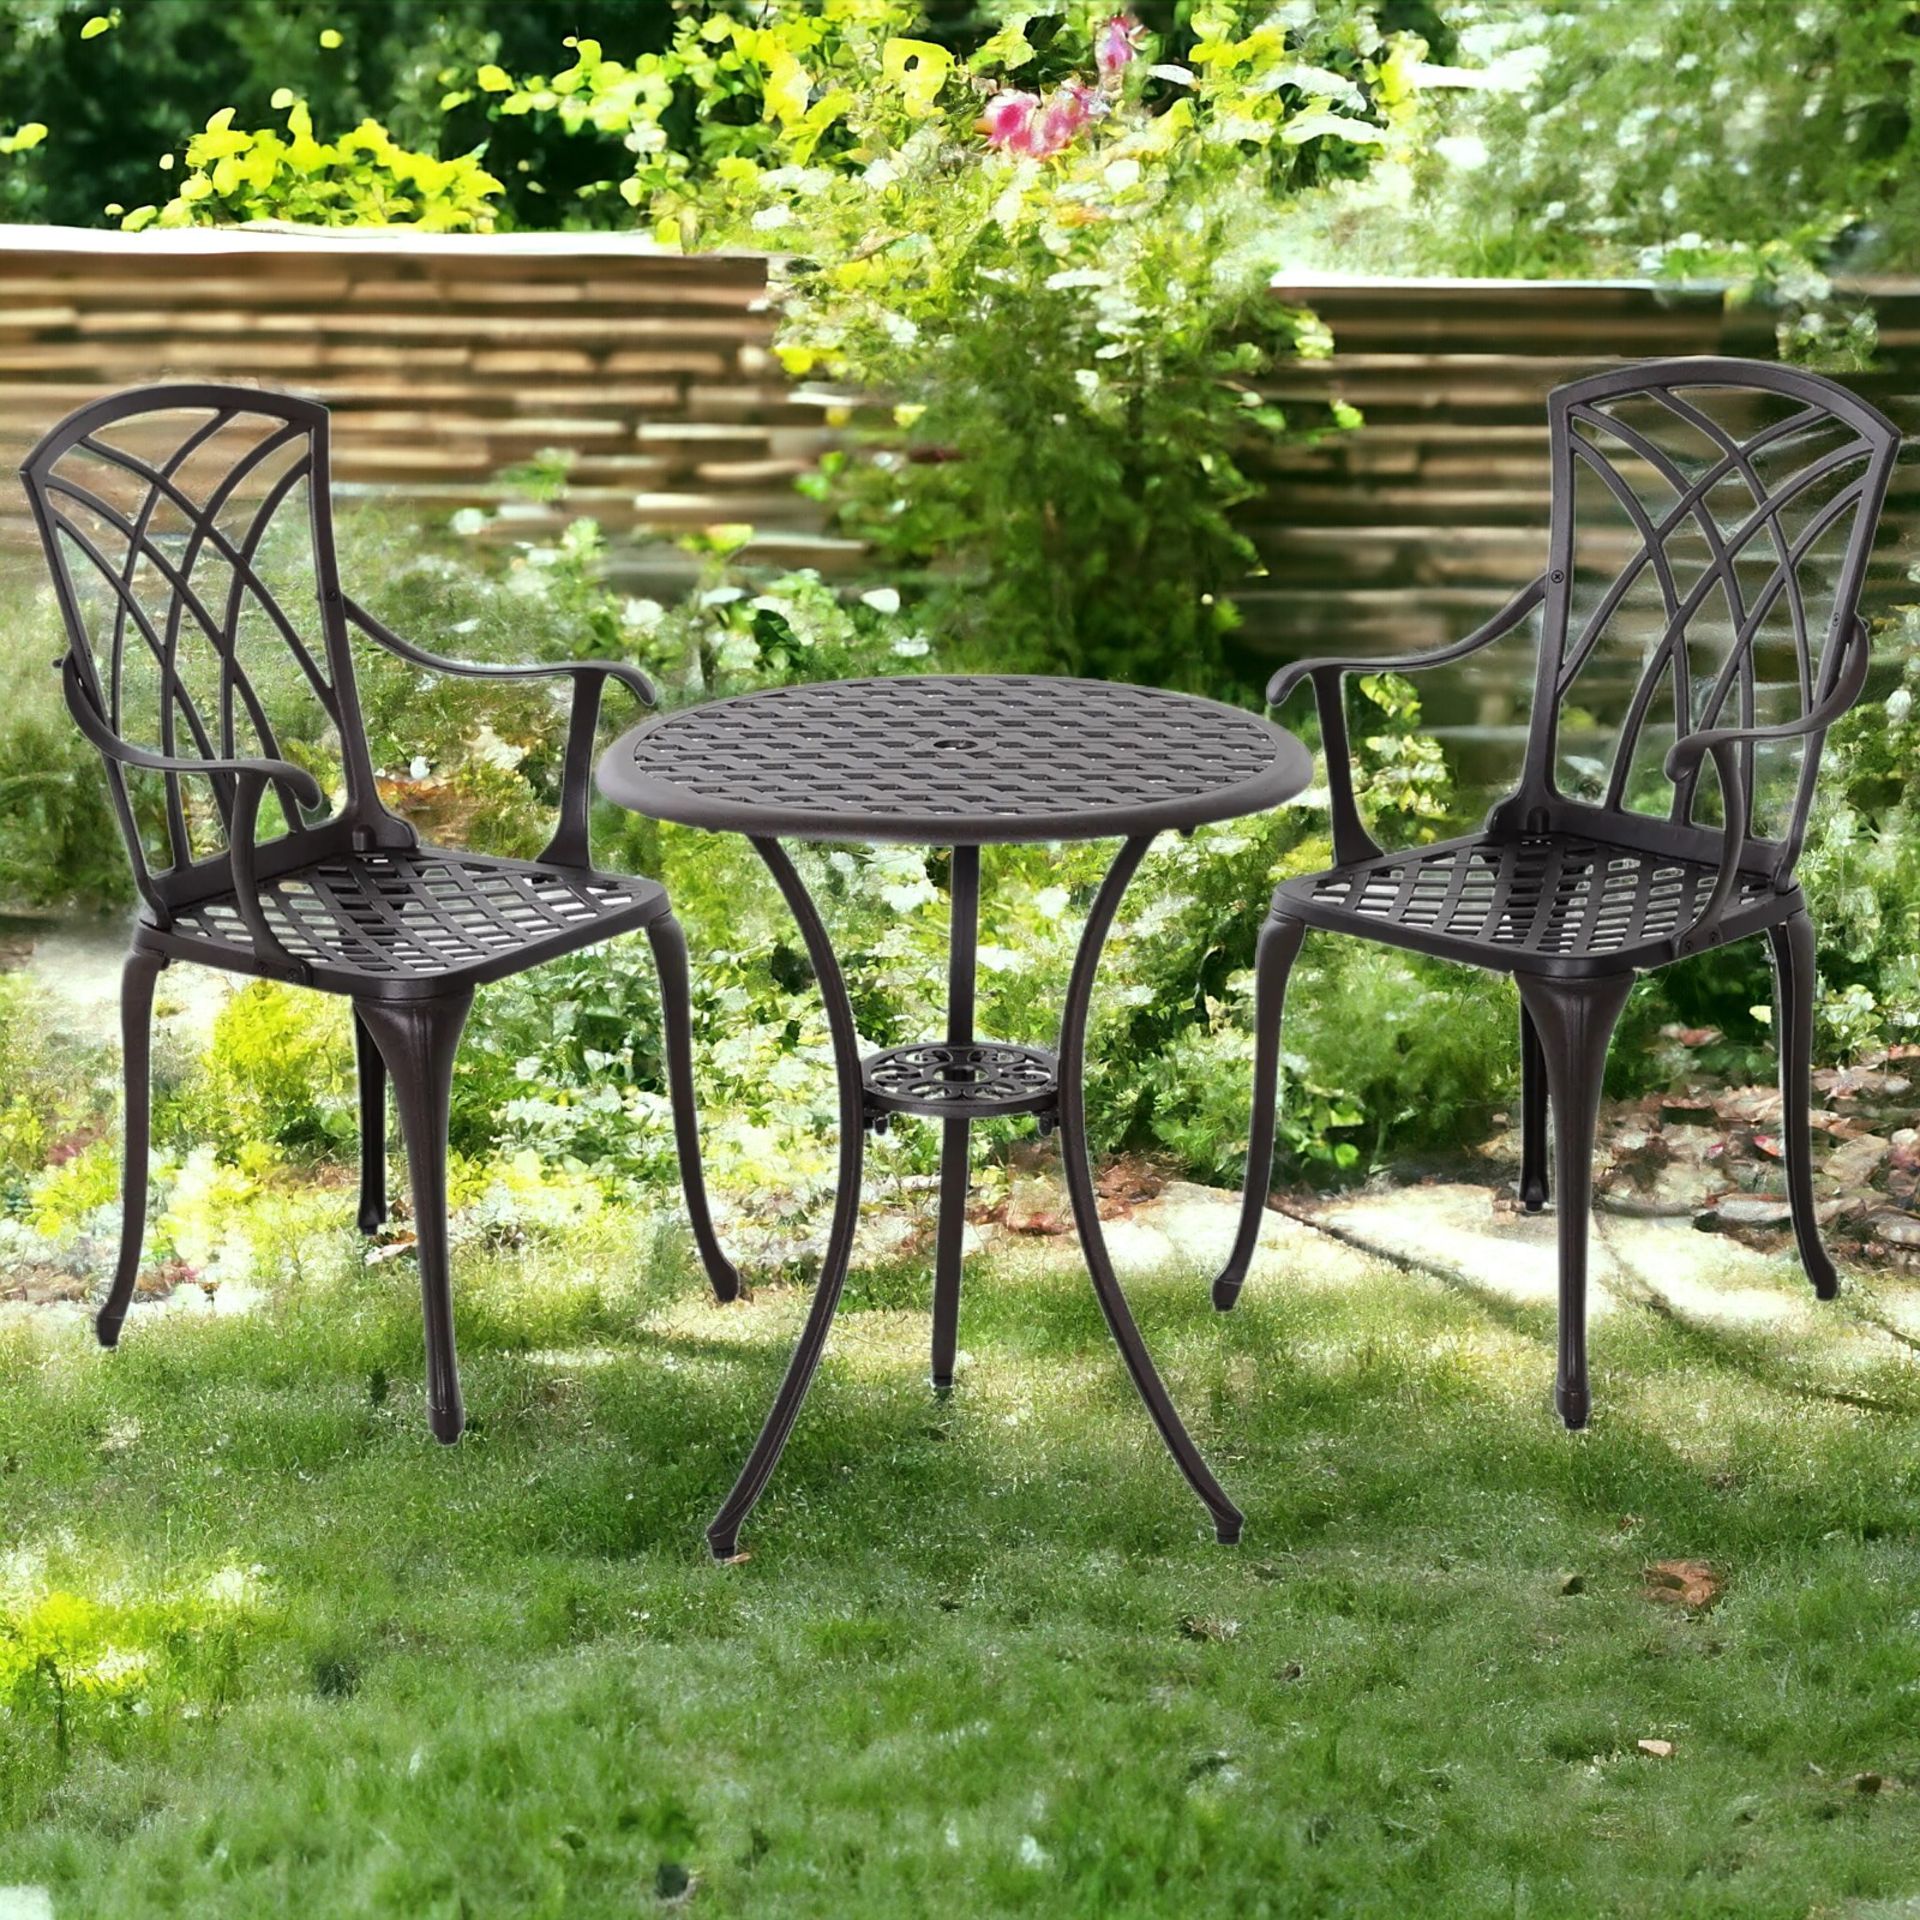 FREE DELIVERY - BRAND NEW 3 PCS COFFEE TABLE CHAIRS OUTDOOR GARDEN FURNITURE SET - Bild 2 aus 2